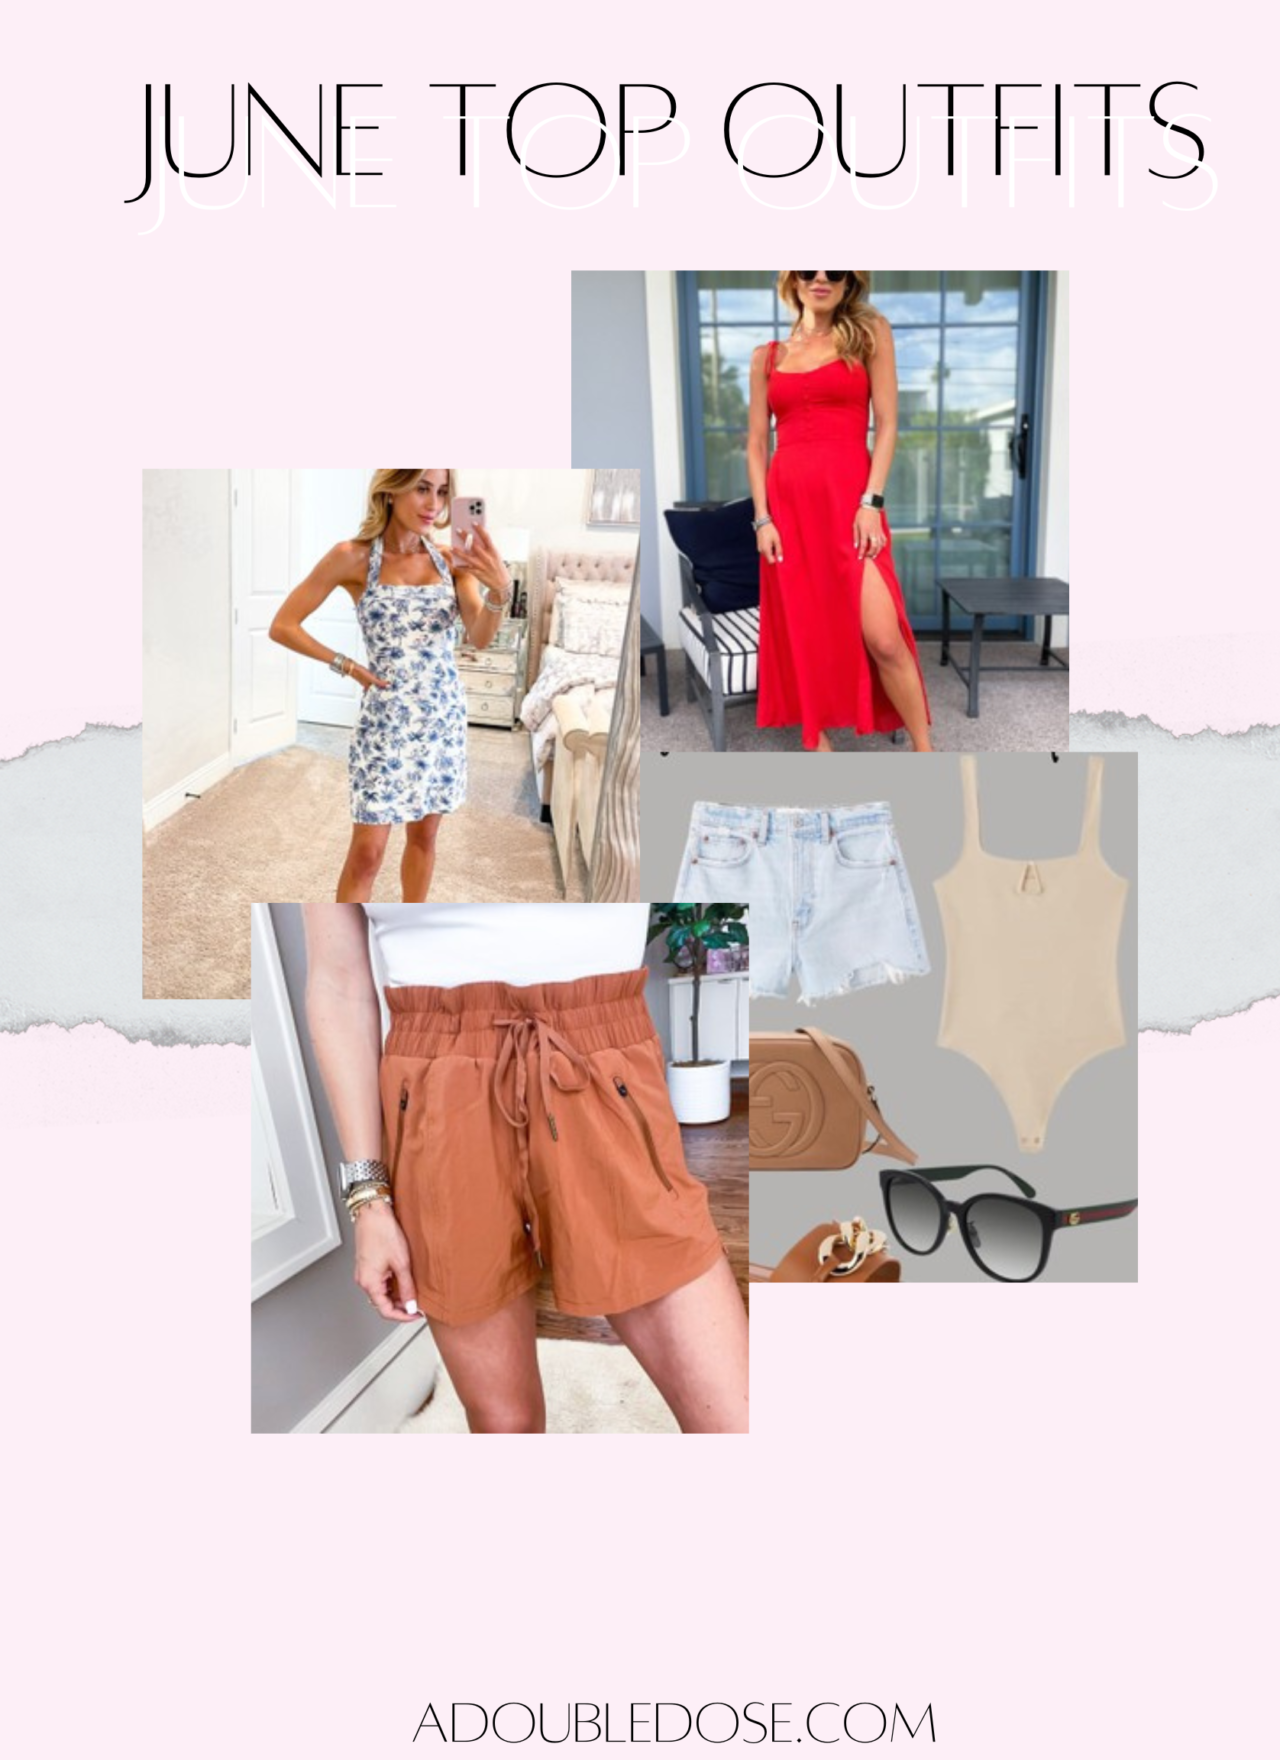 Lifestyle and fashion blogger Alexis Belbel shares her top selling outfits from June | adoubledose.com